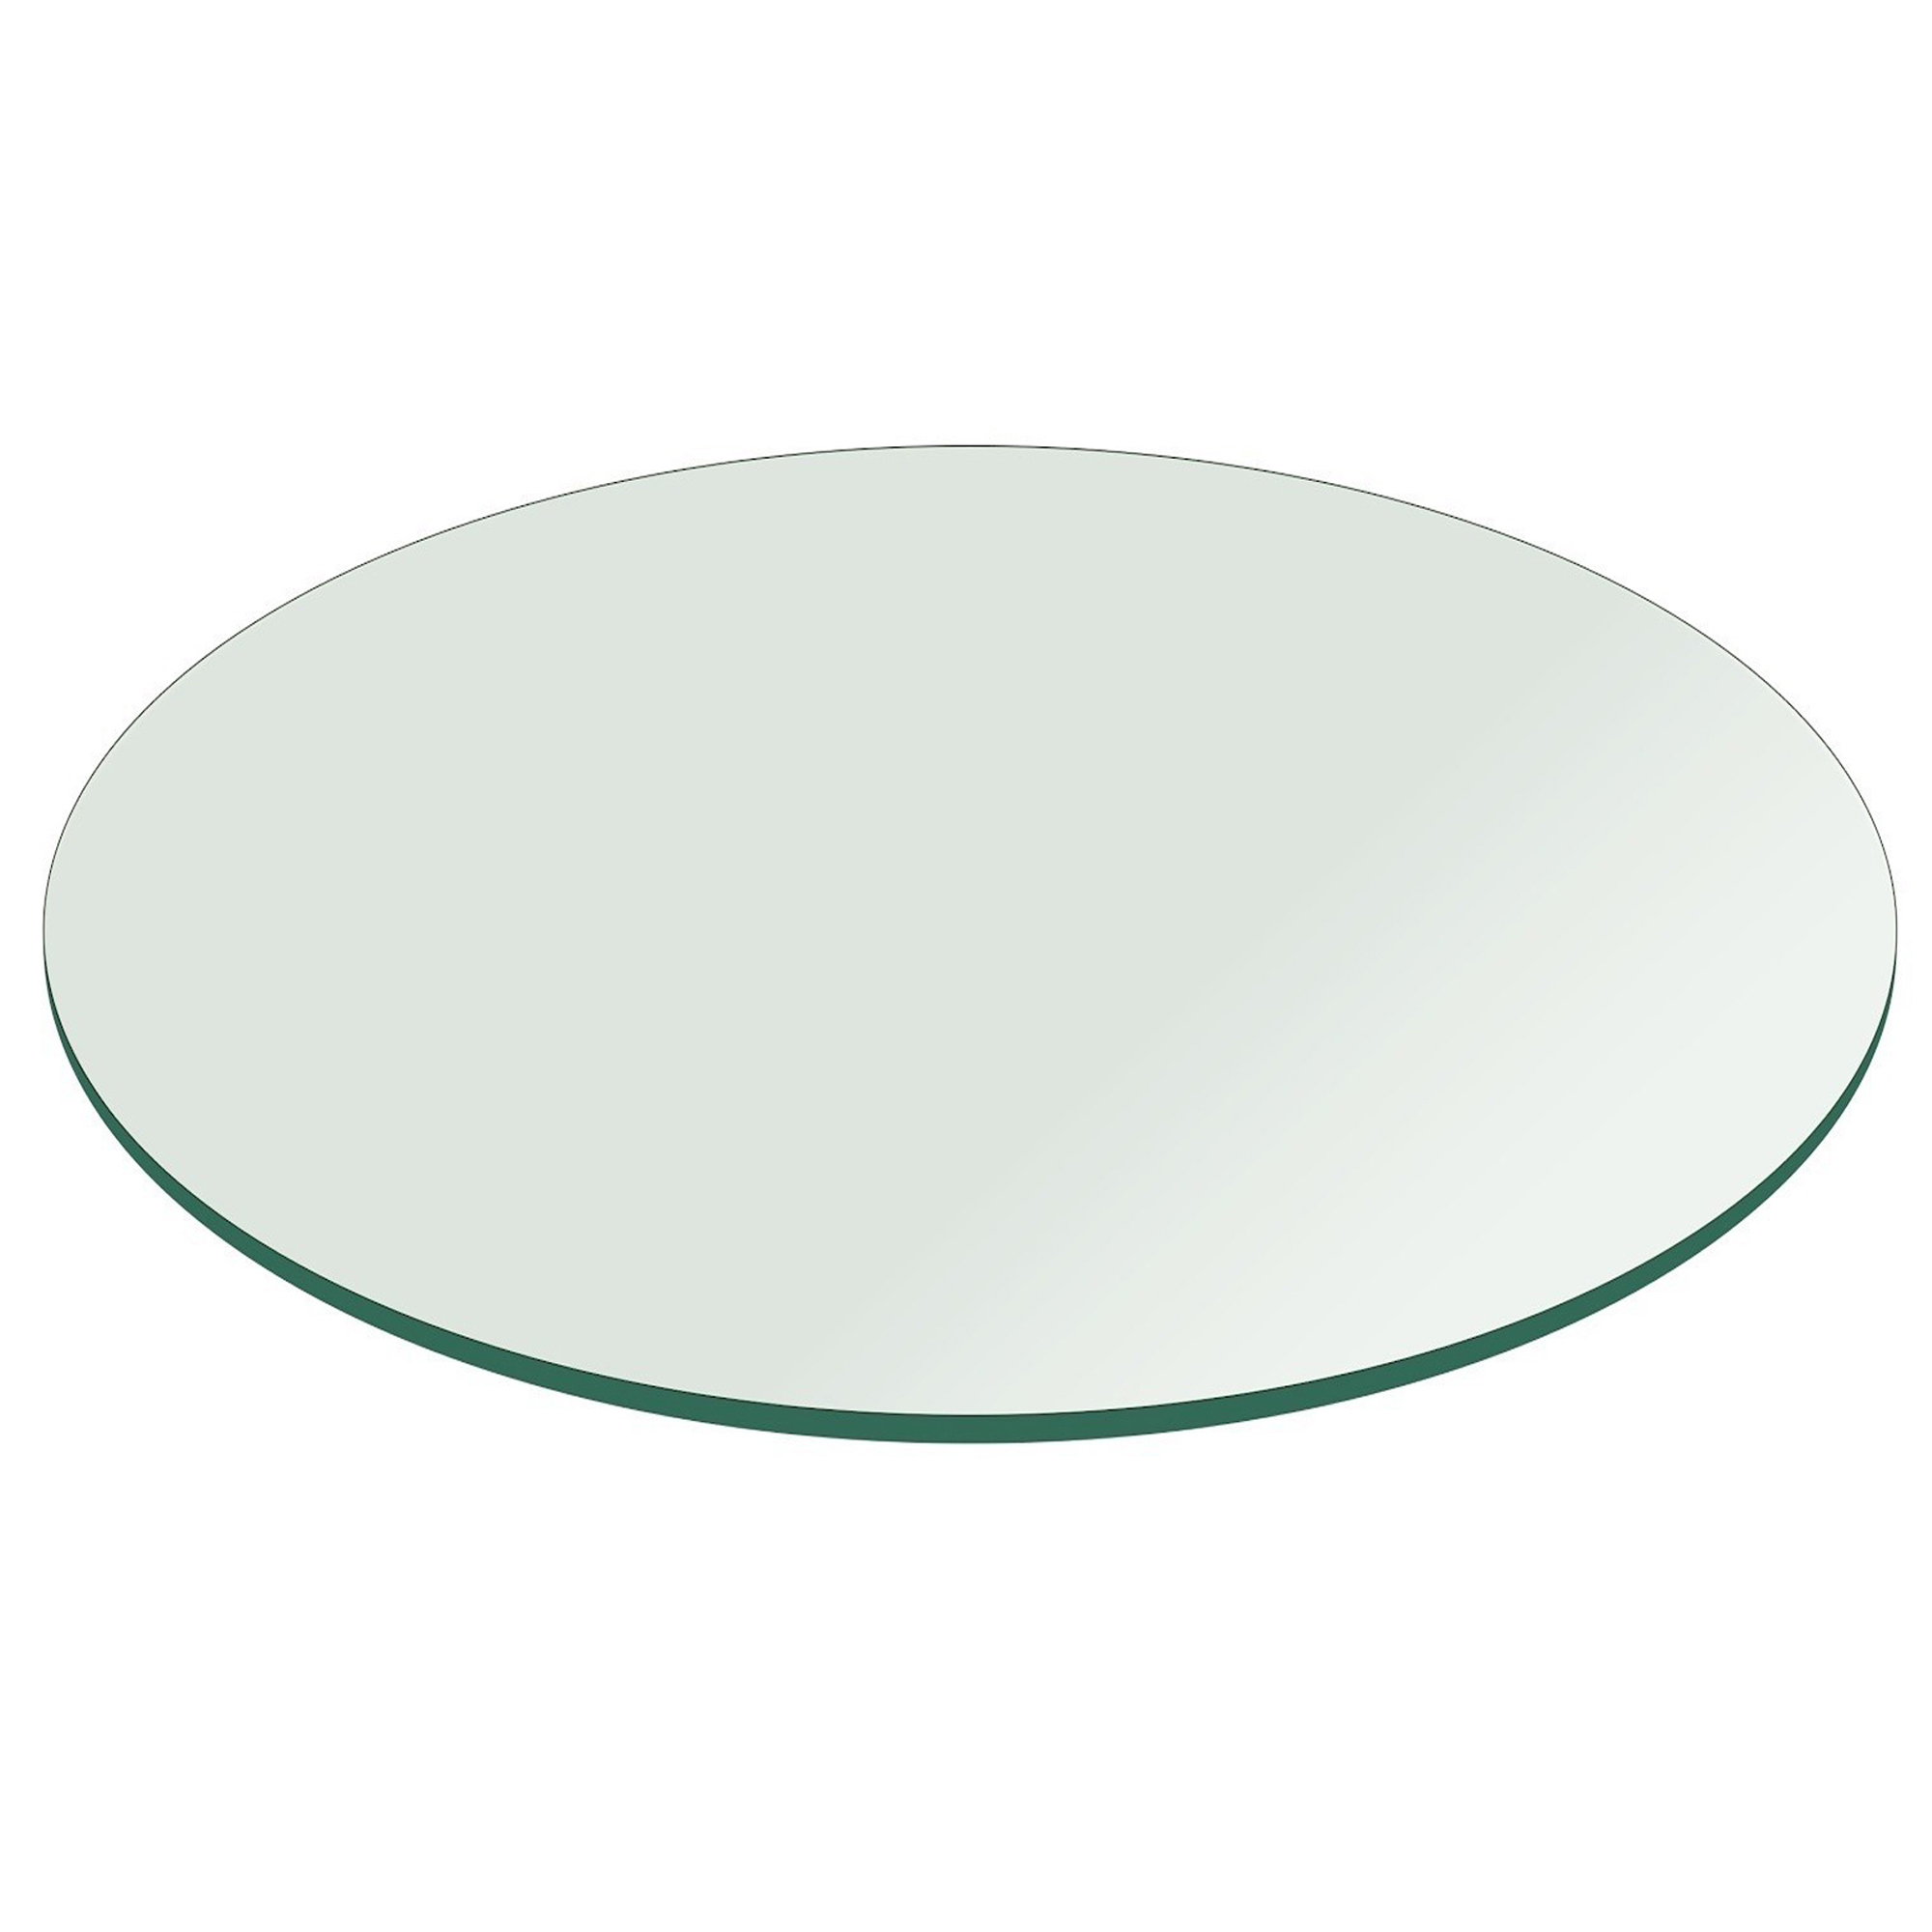 60 Round Glass Table Top 3 4 Thick, How To Make A 60 Inch Round Table Top